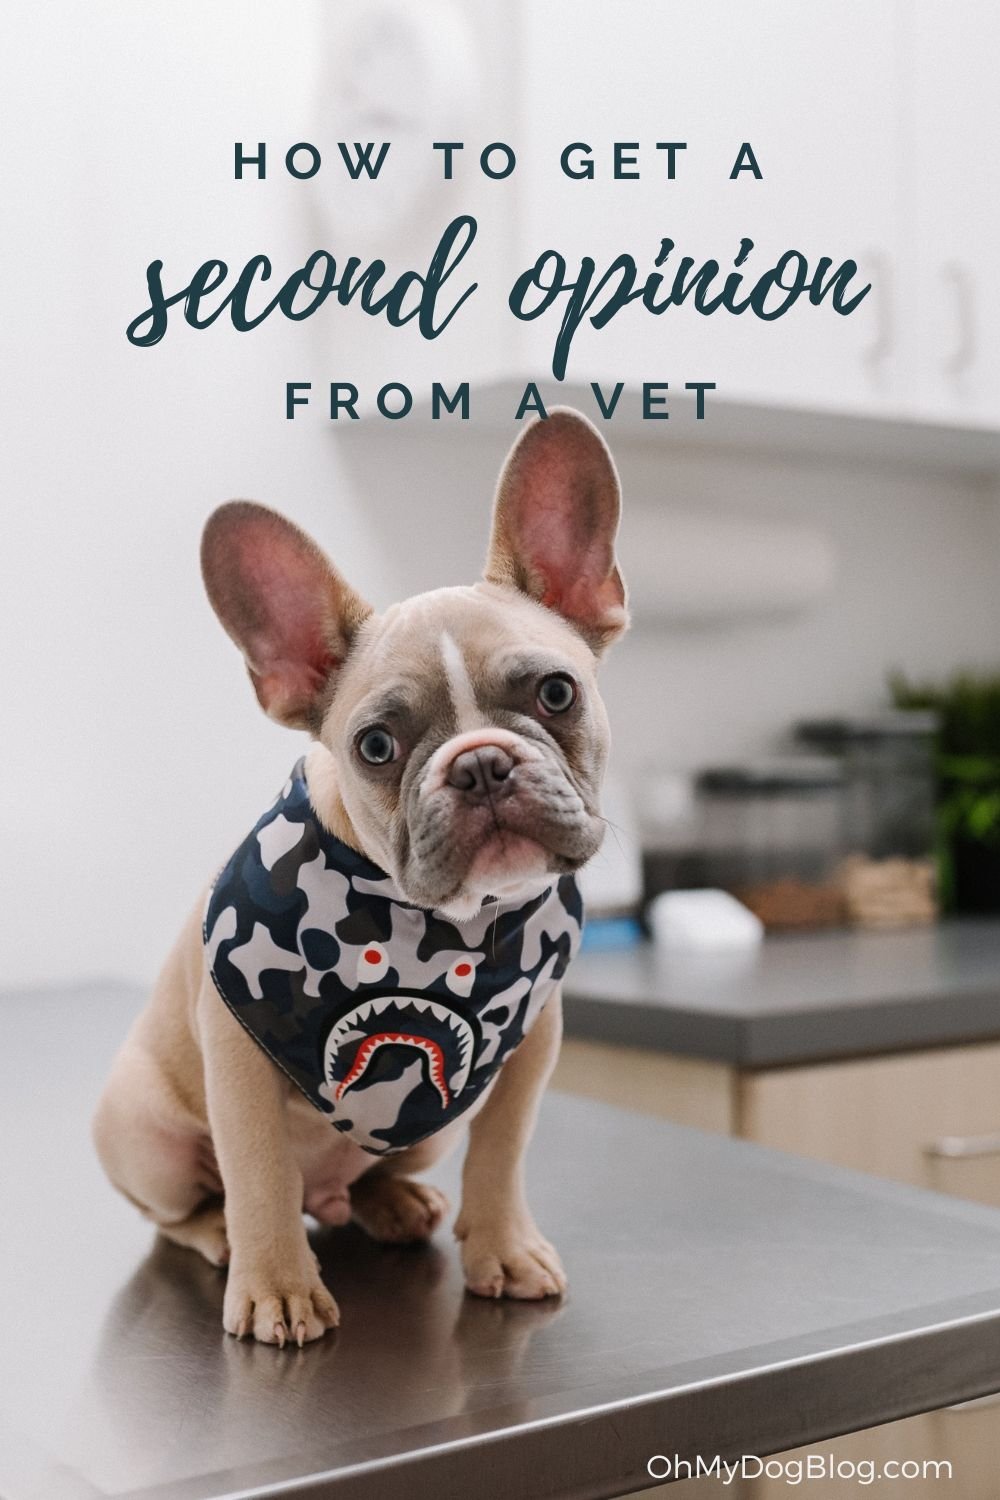 How to get a second opinion from a vet